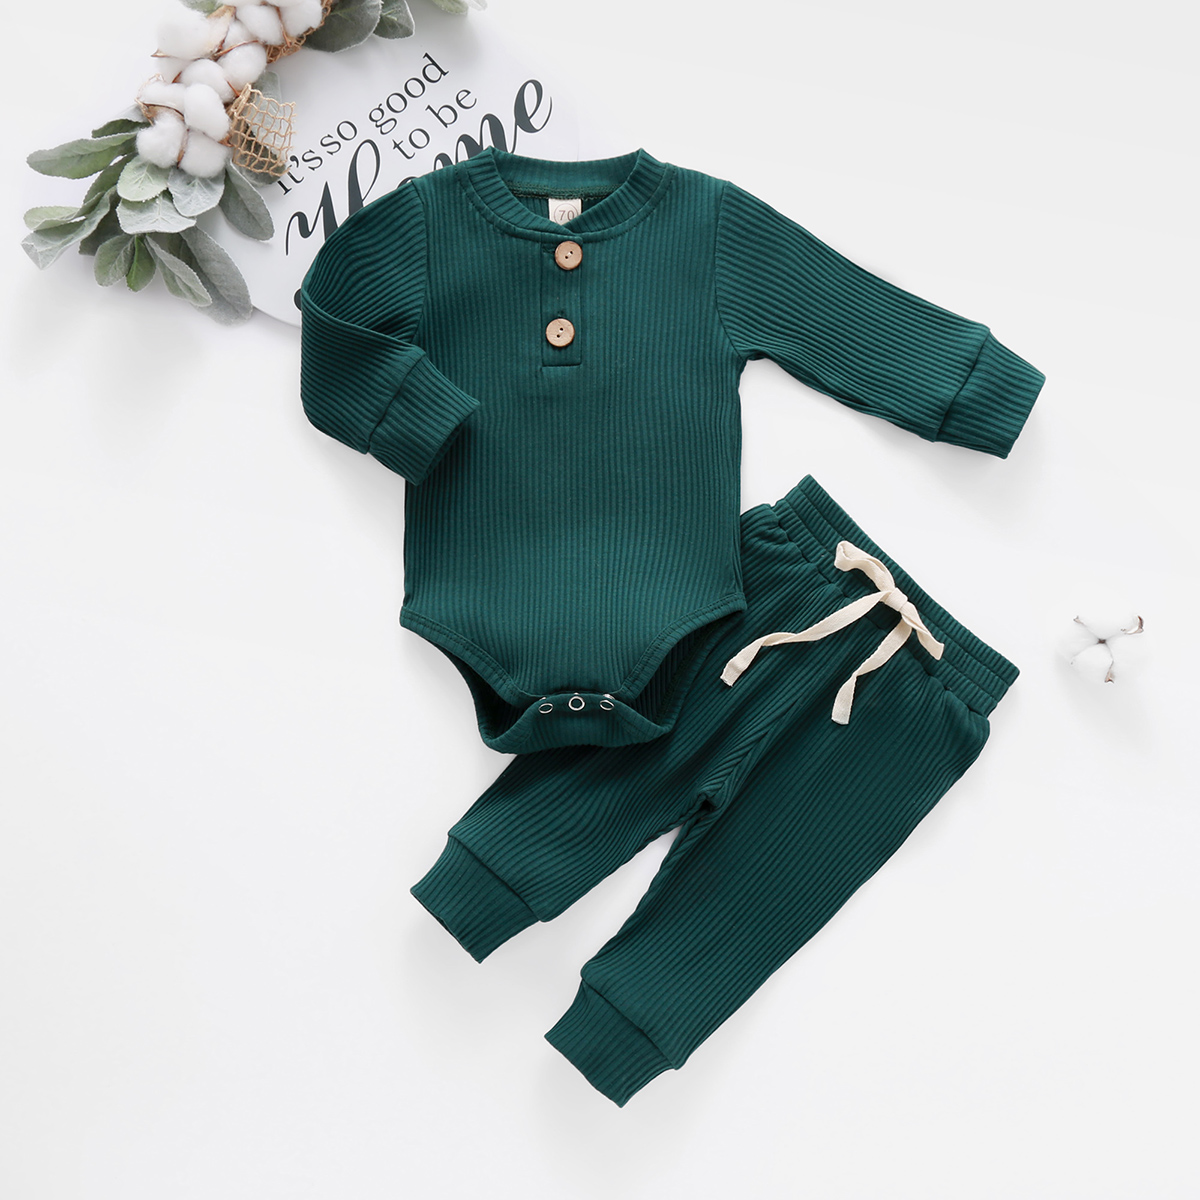 Infant Newborn Baby Girl Boy Spring Autumn Ribbed/Plaid Solid Clothes Sets Long Sleeve Bodysuits + Elastic Pants 2PCs Outfits